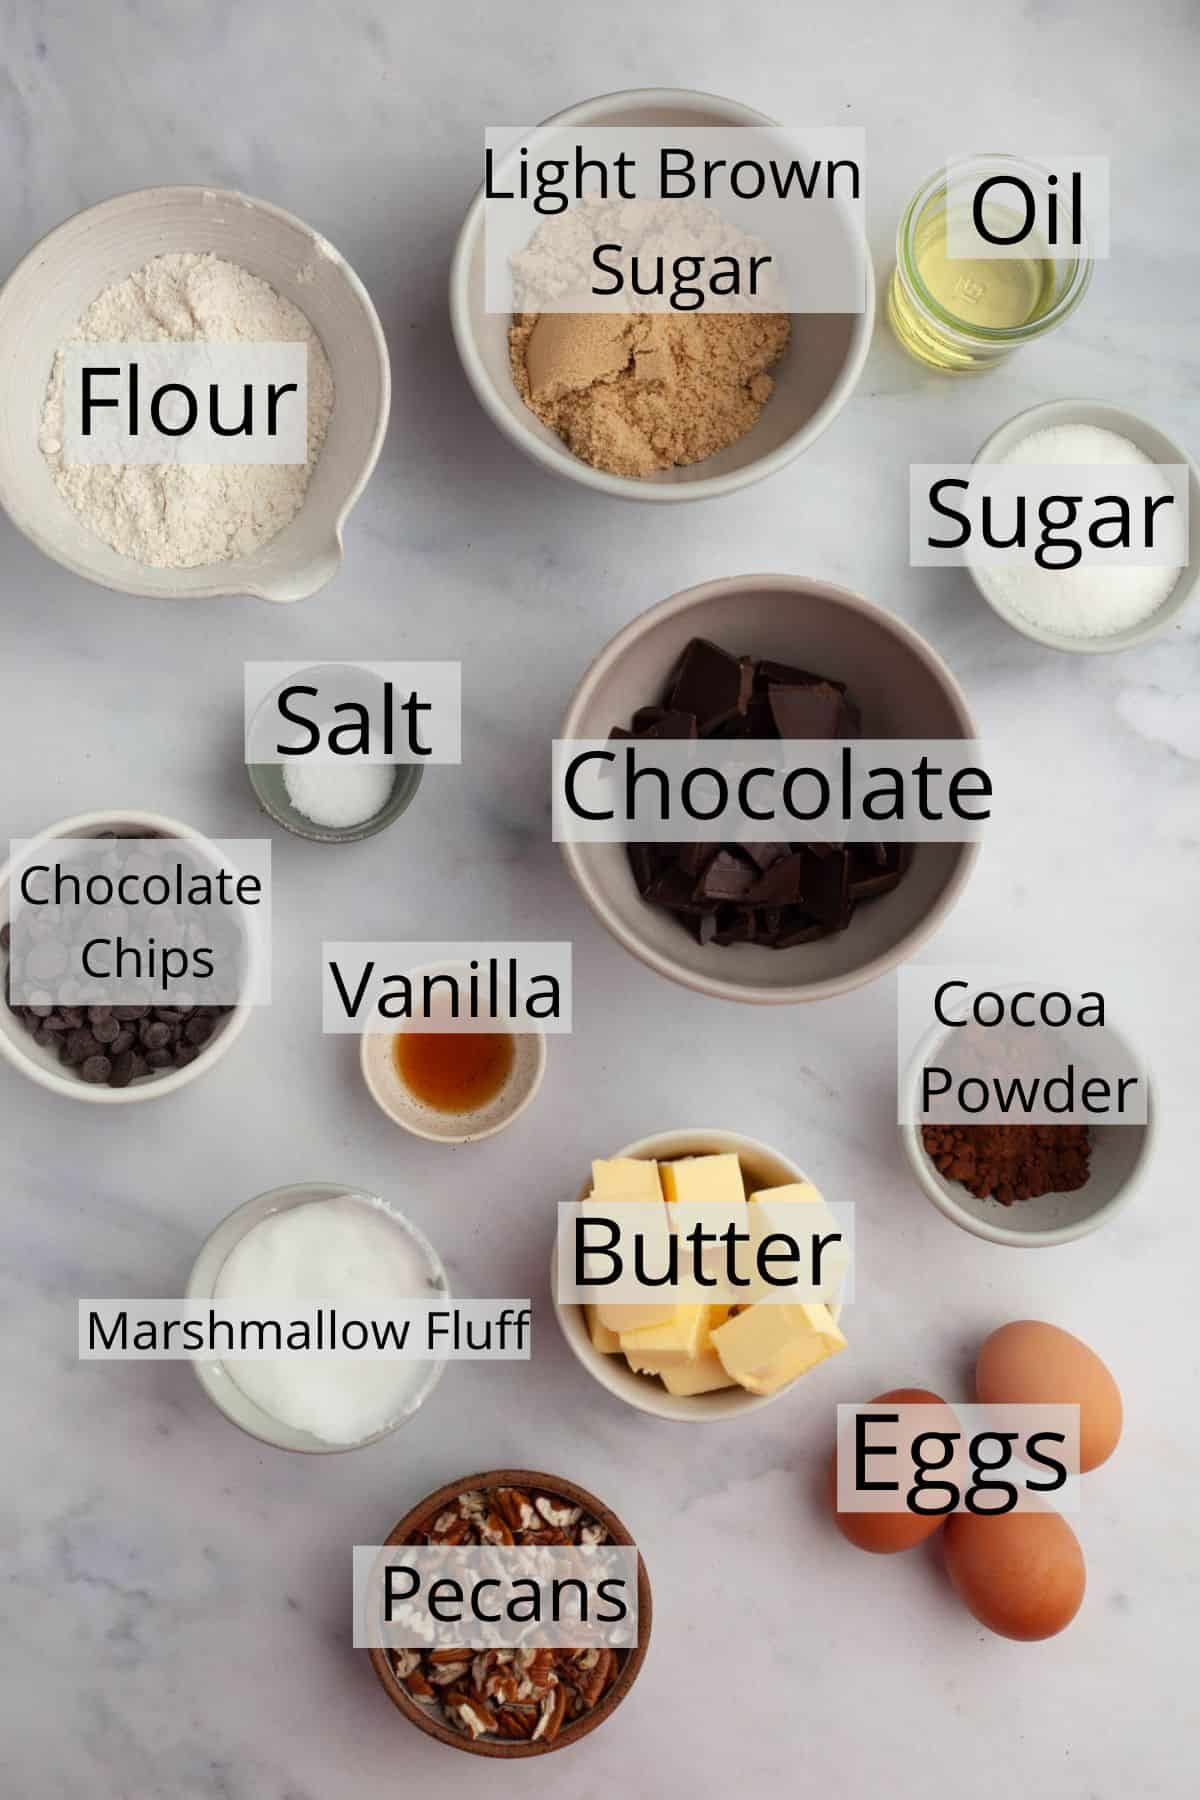 All the ingredients needed for marshmallow fluff brownies weighed out into small bowls.